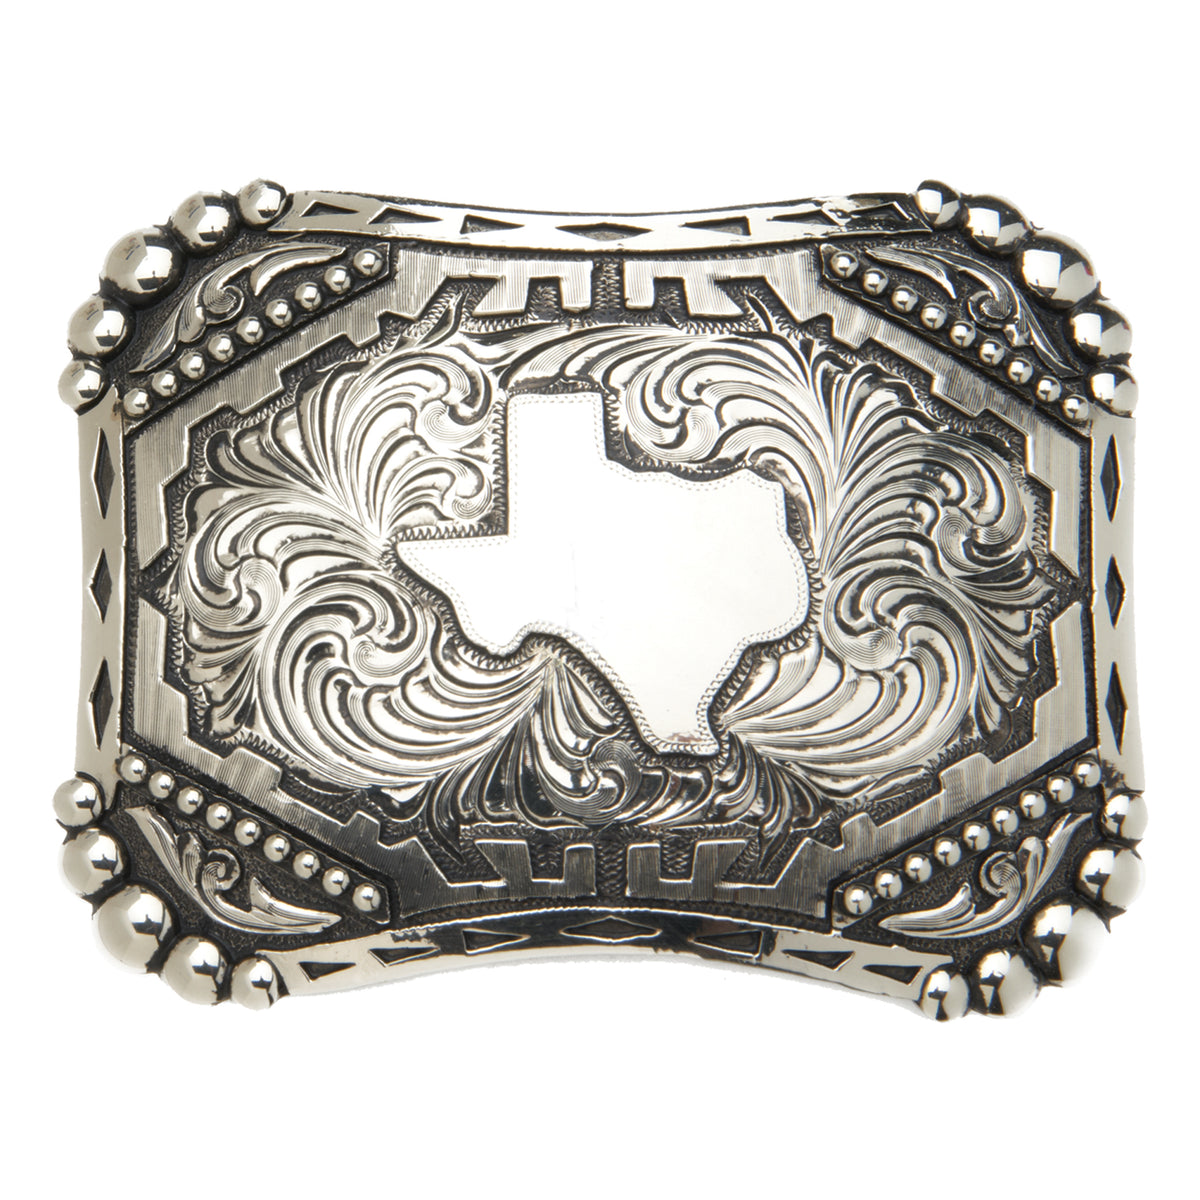 “Silverton” State of Texas with Beading Buckle